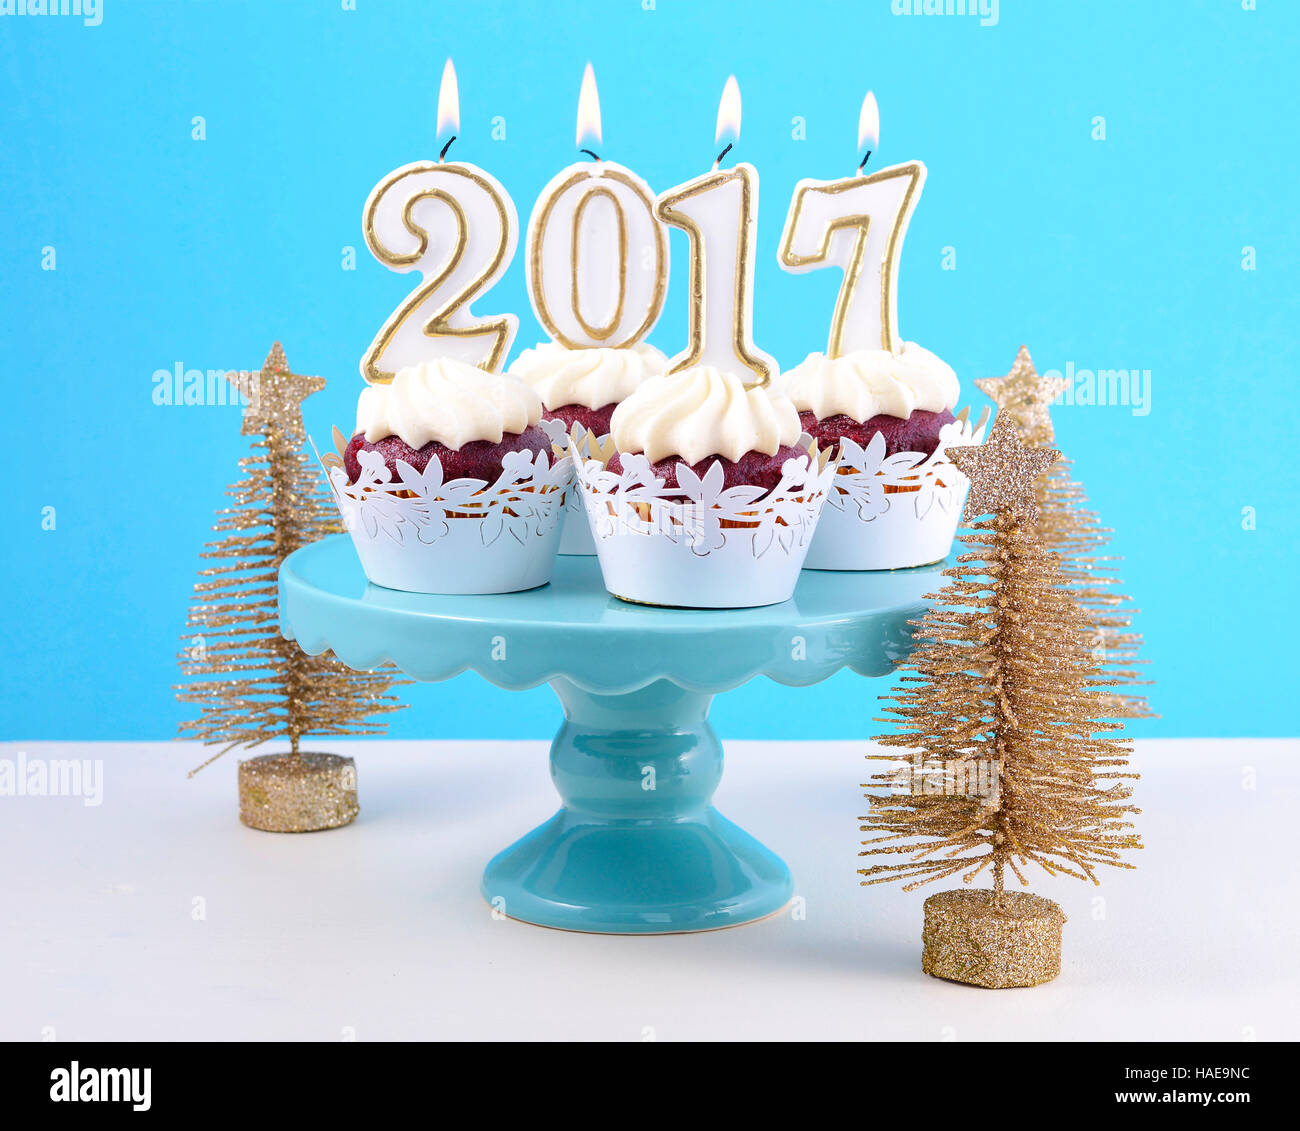 Happy New Year Cupcakes With 17 Candles In A Blue Gold And White Winter Theme Setting Background On Cakestand With Gold Christmas Trees Stock Photo Alamy